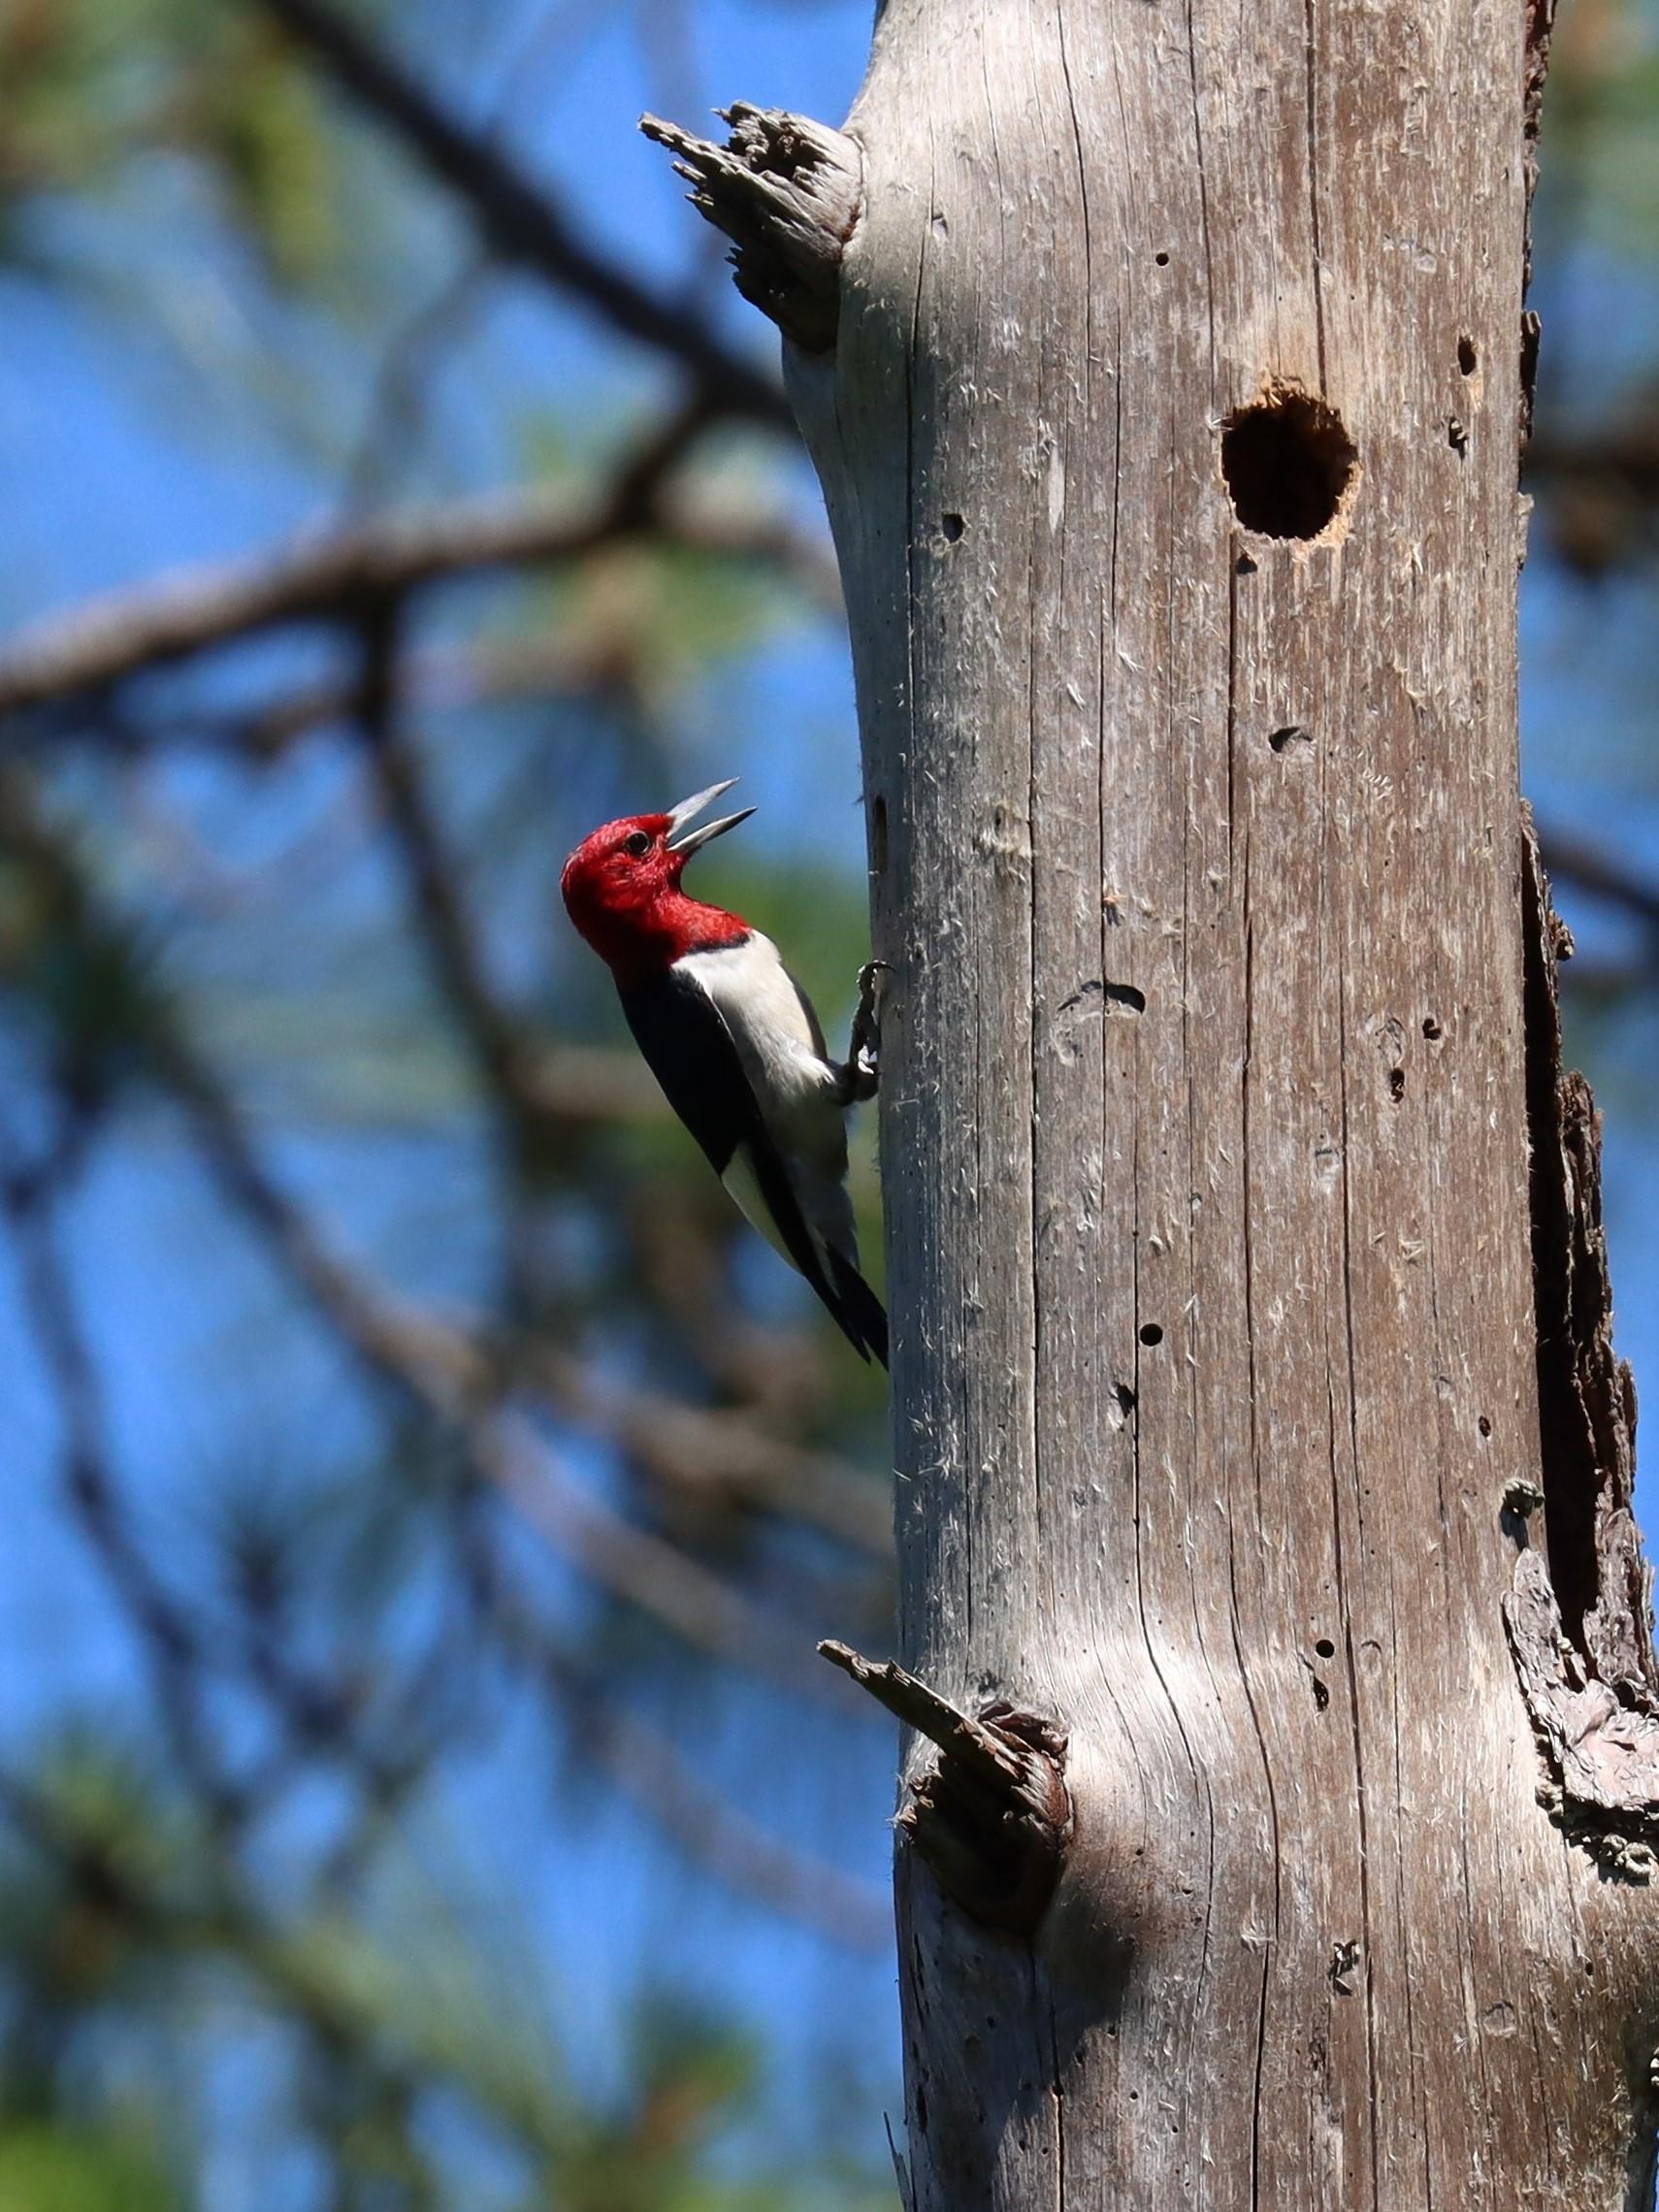 A woodpecker with bright red head clinging to a dead tree.